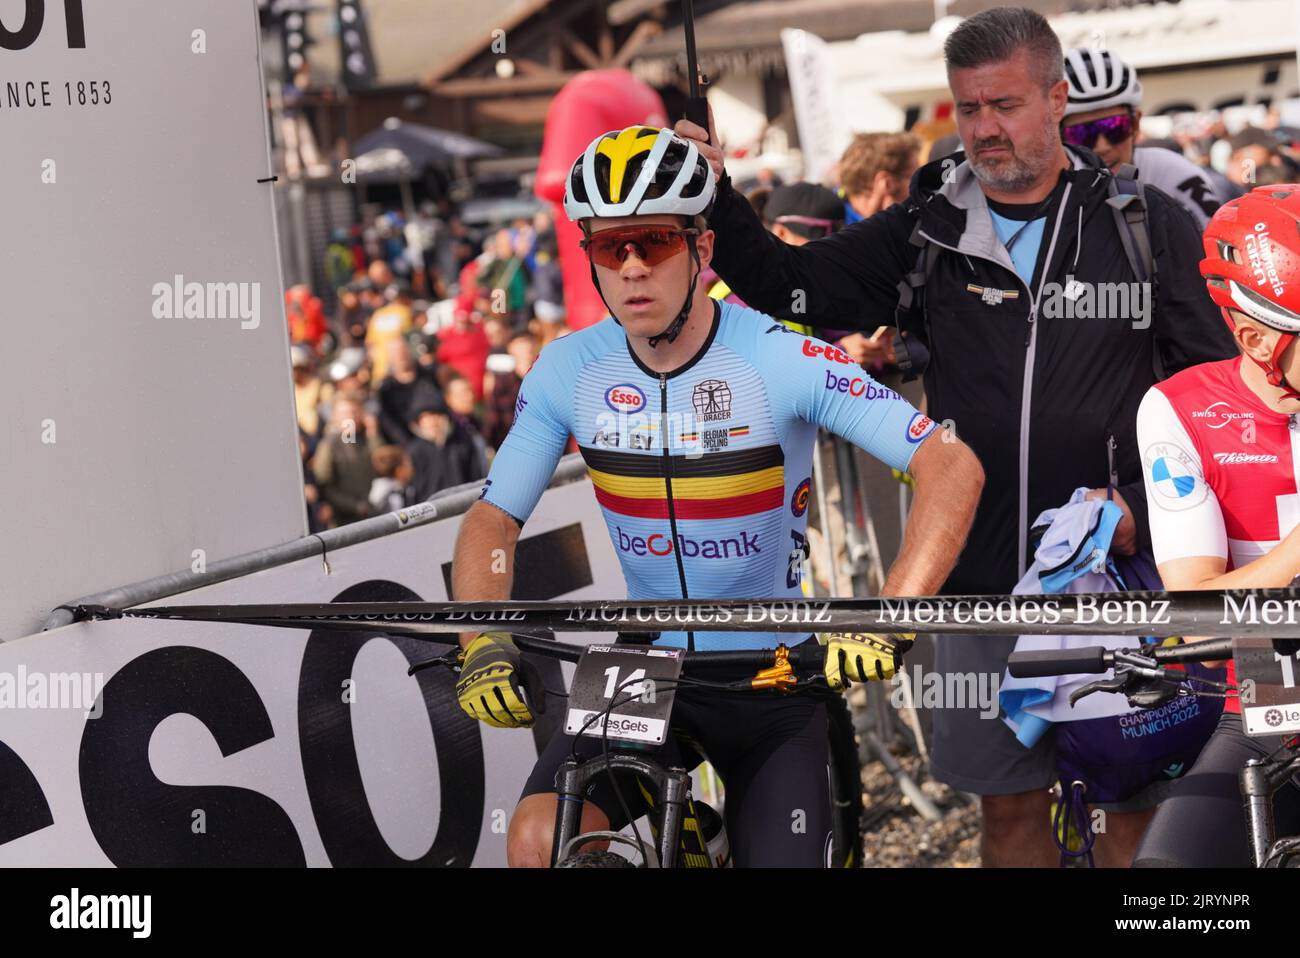 14 SCHUERMANS Jens in UCI Mountain Bike World Championships in Les Gets ...